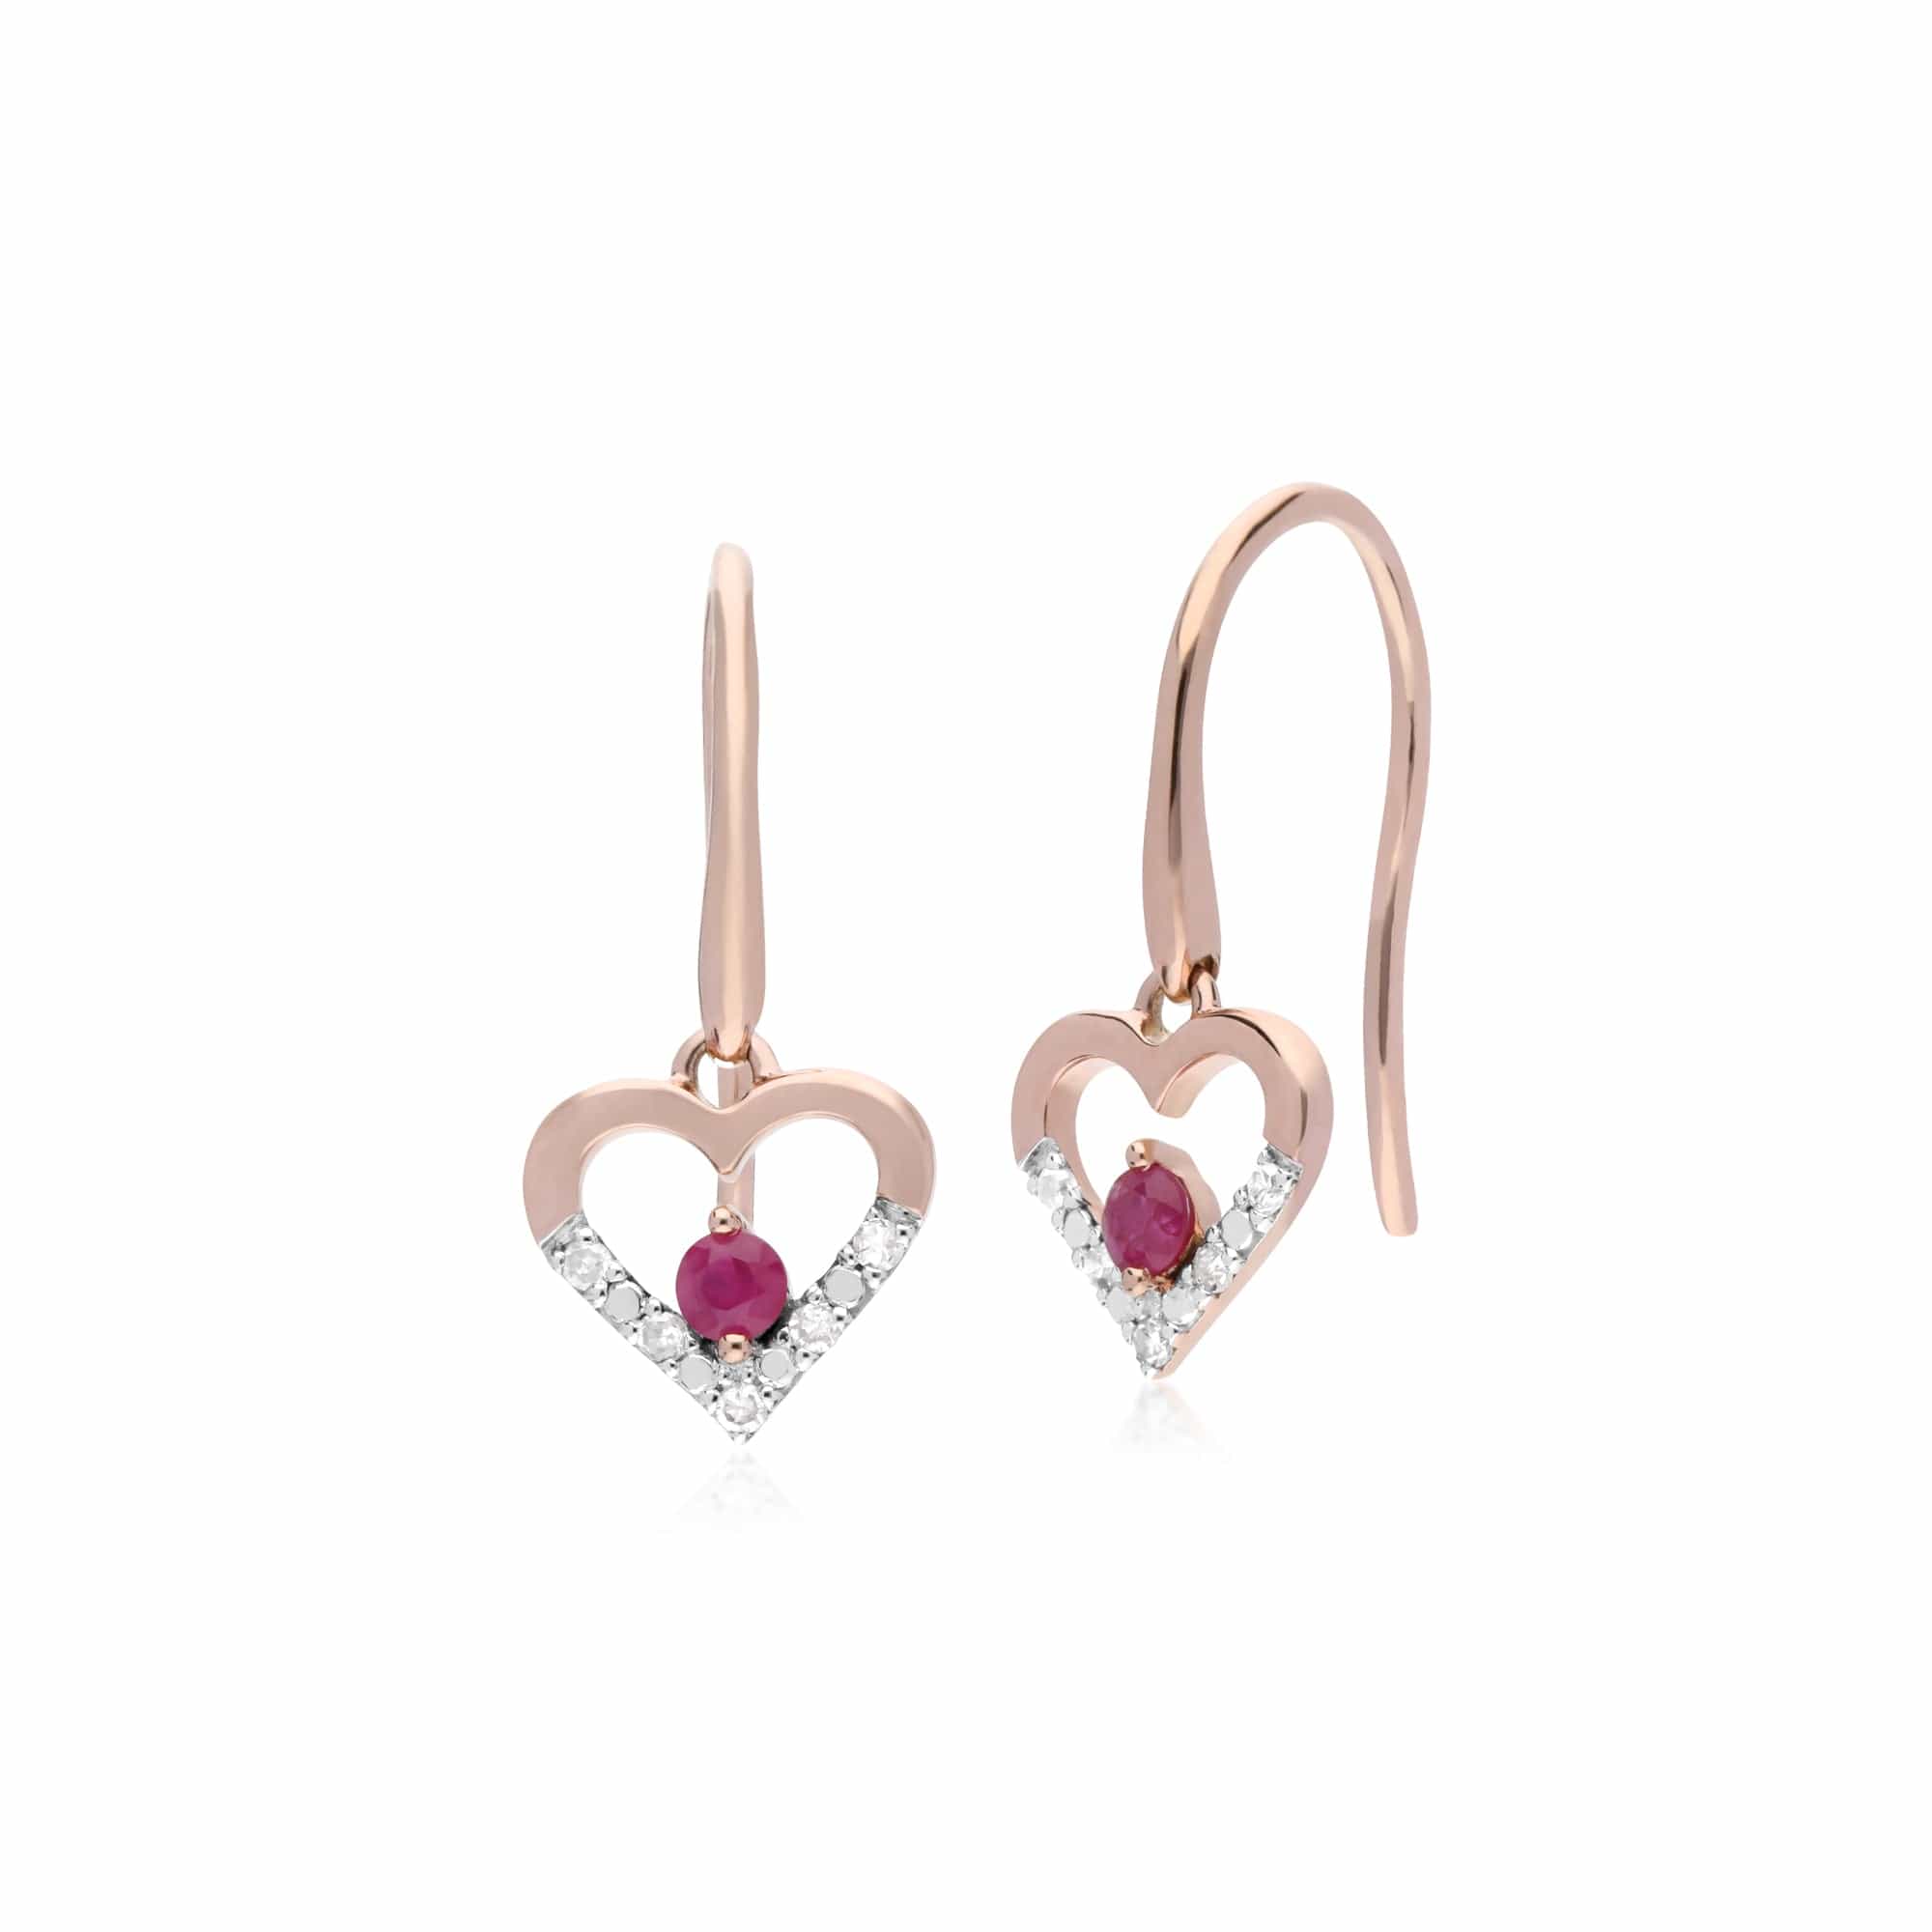 135E1580019-135P1921019 Classic Round Ruby & Diamond Heart Drop Earrings & Pendant Set in 9ct Rose Gold 2